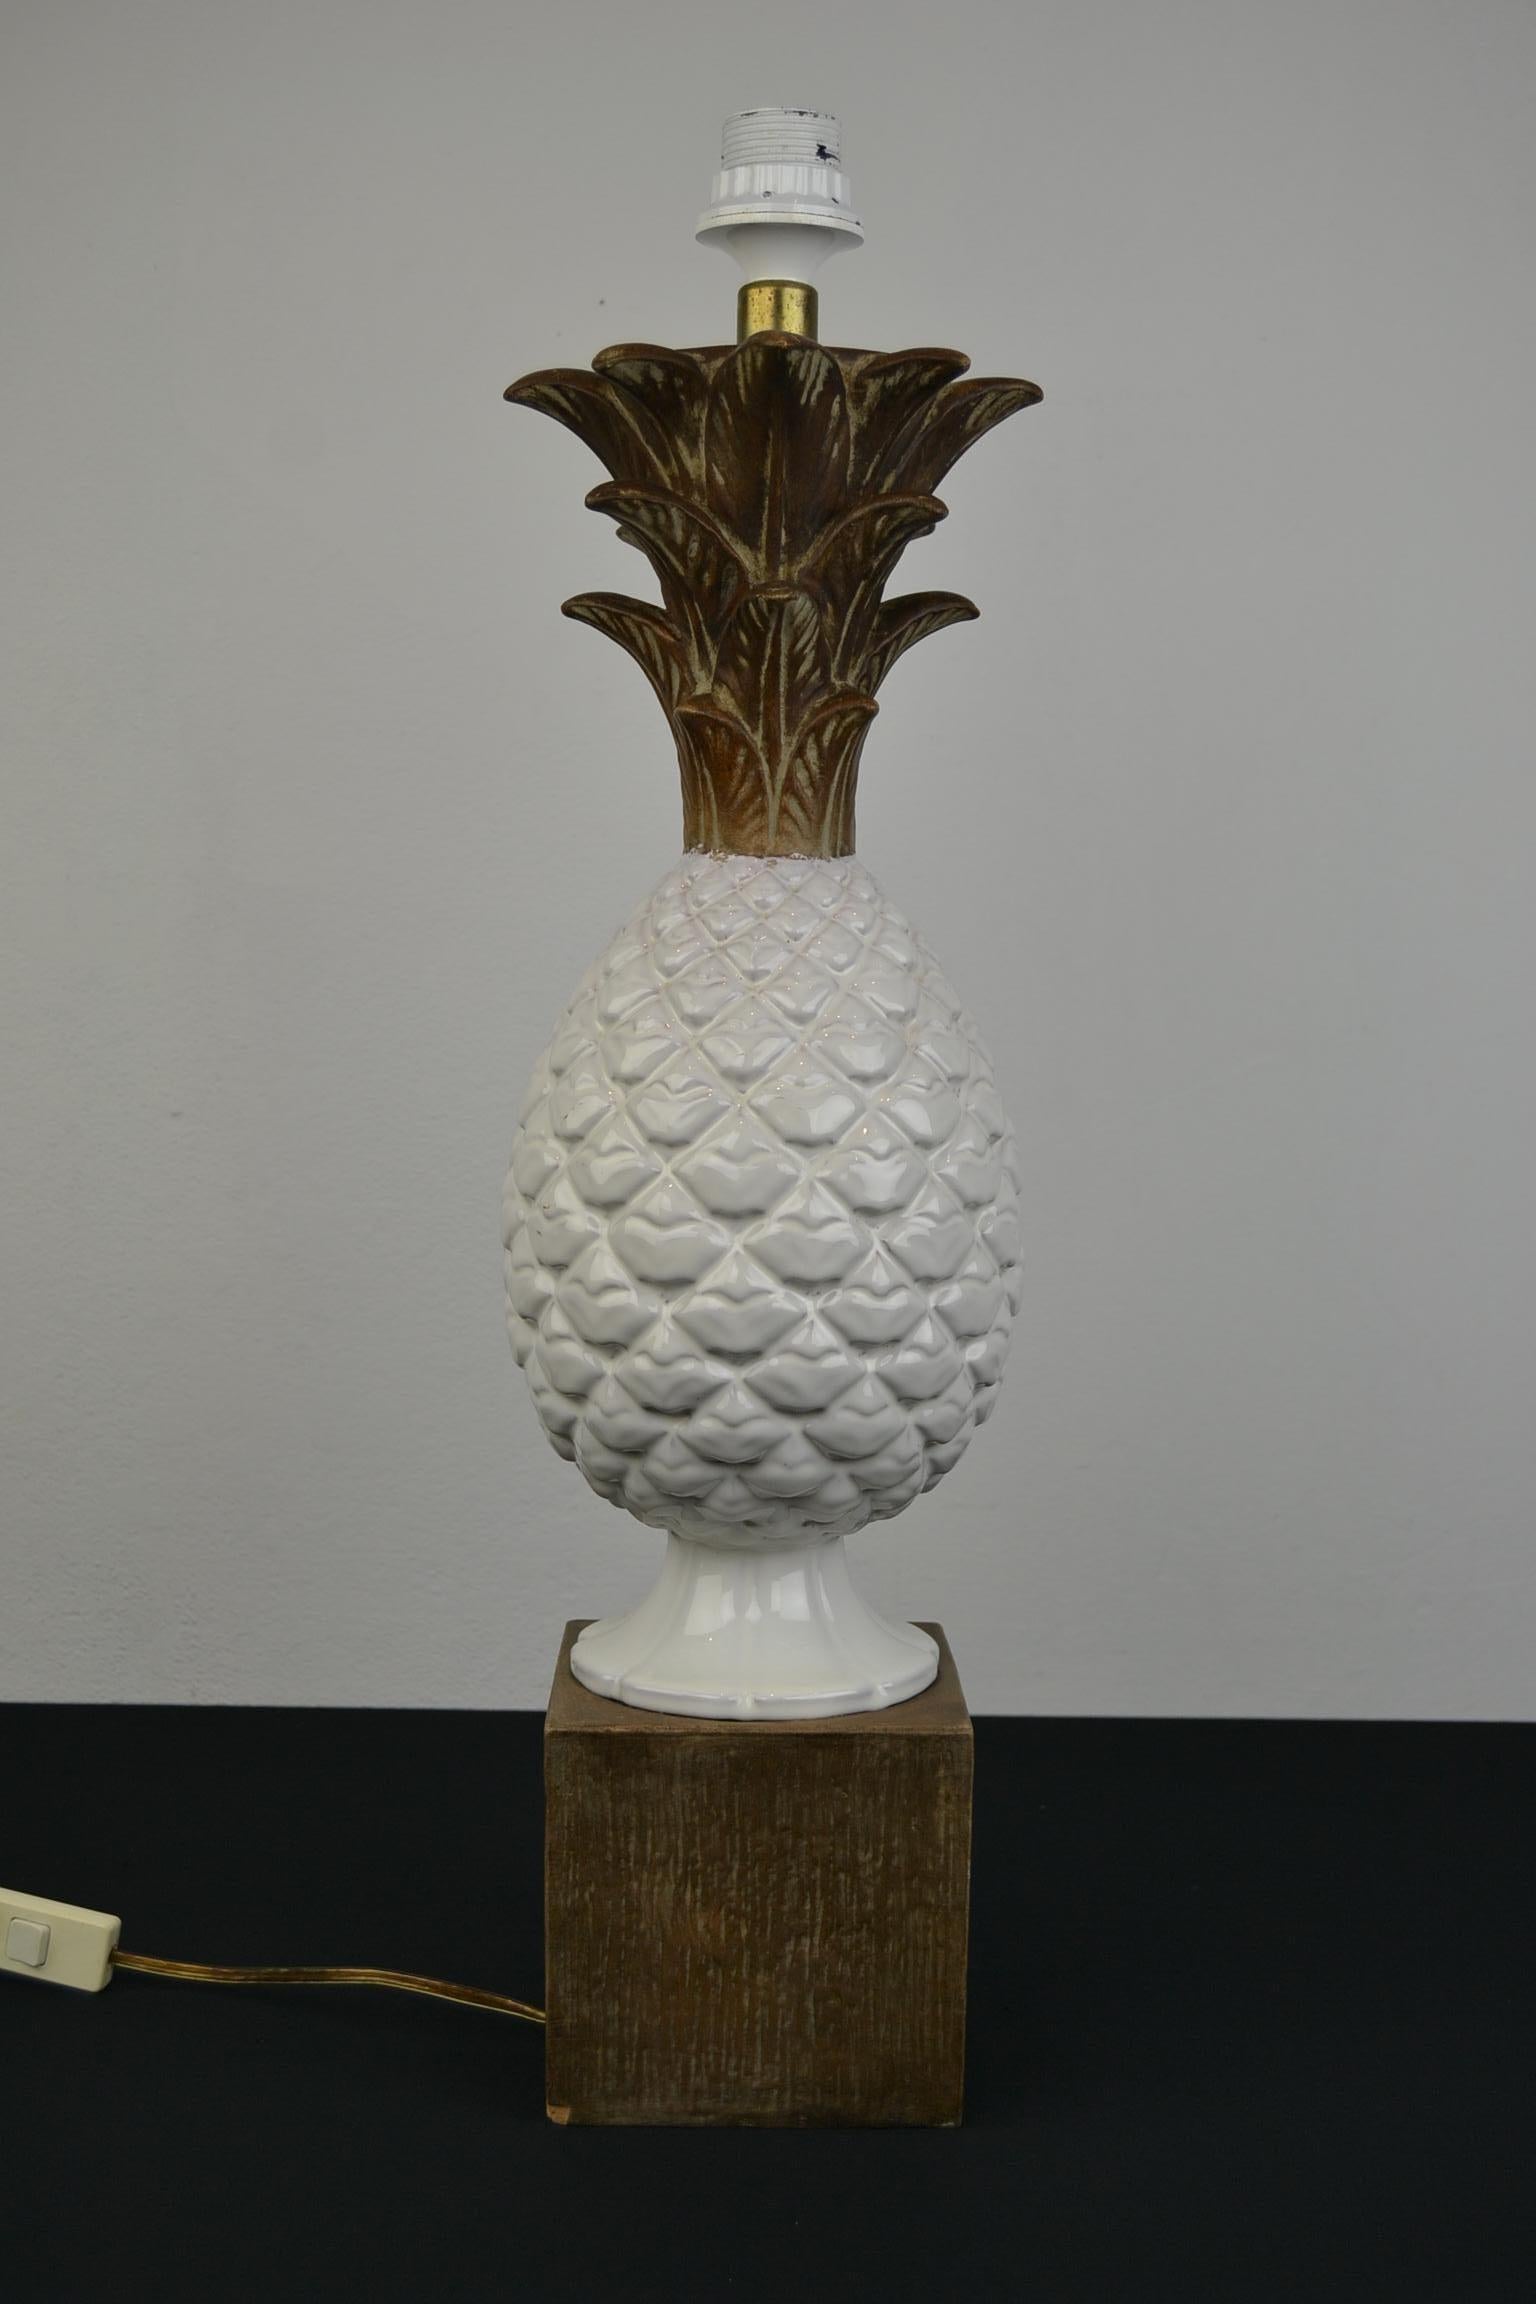 Zaccagnini Ceramic Pineapple Table Lamp, Italy, 1960s For Sale 4